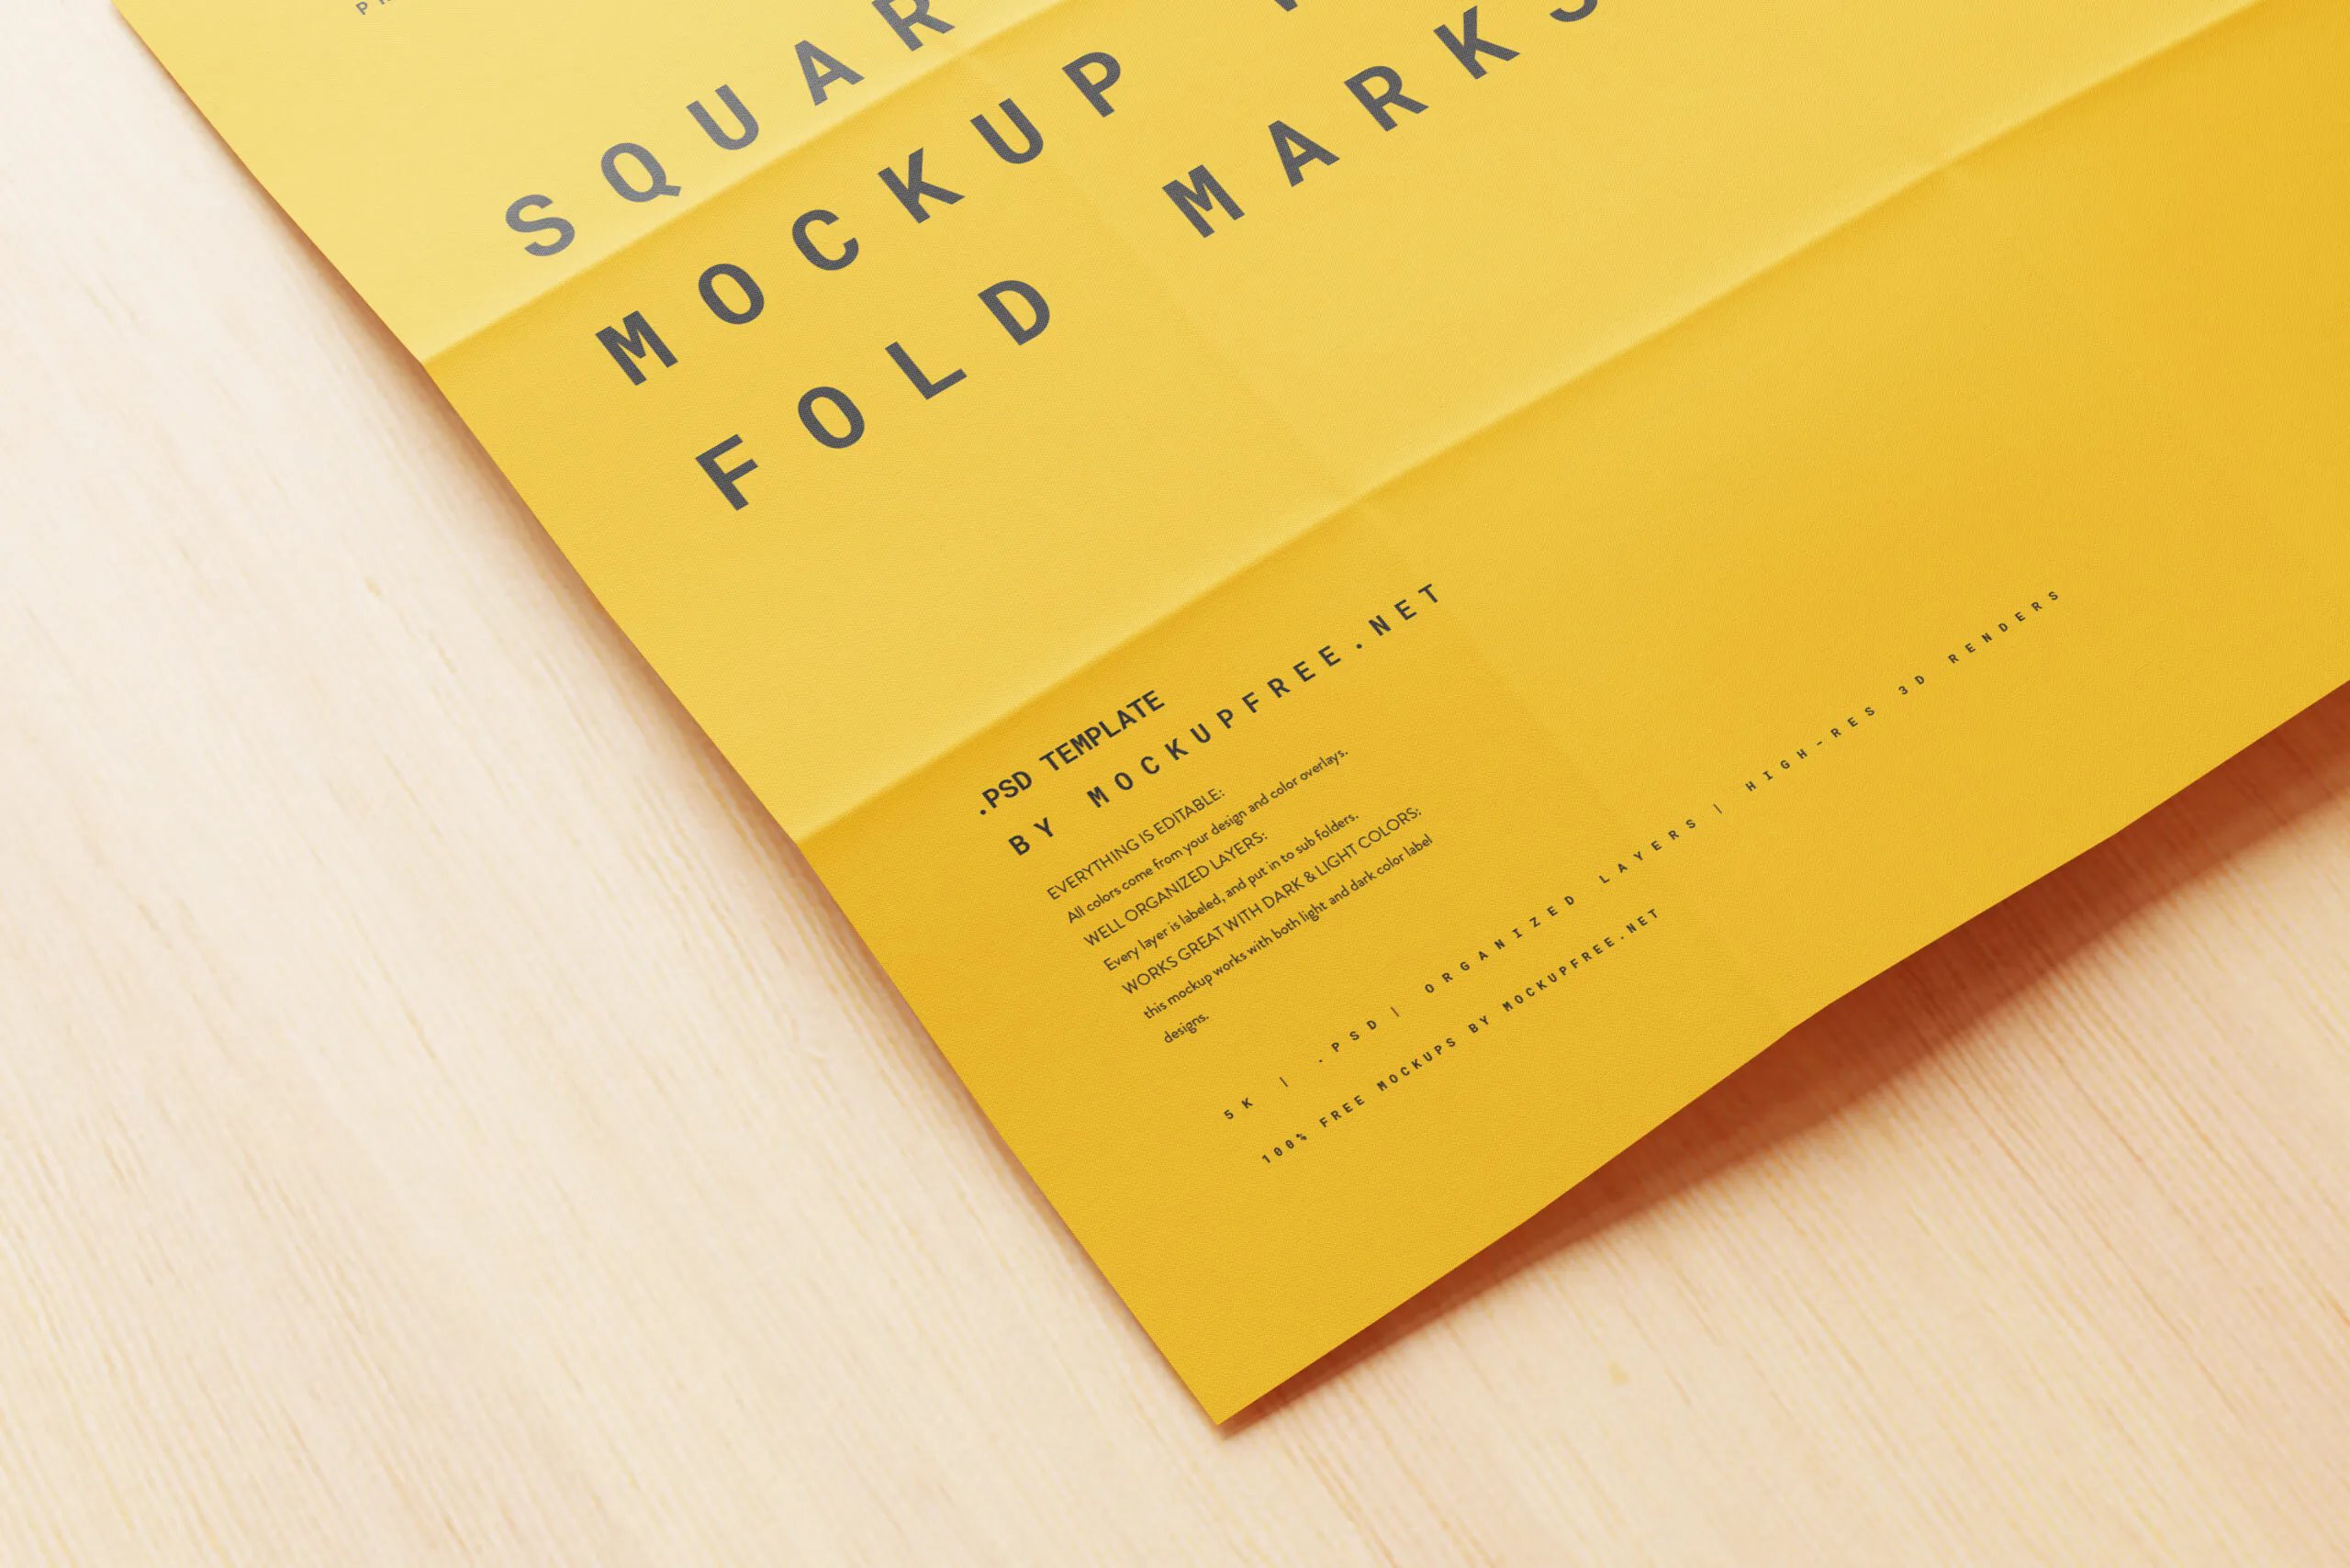 10 Paper Mockup with Fold Marks in Distinct Views FREE PSD